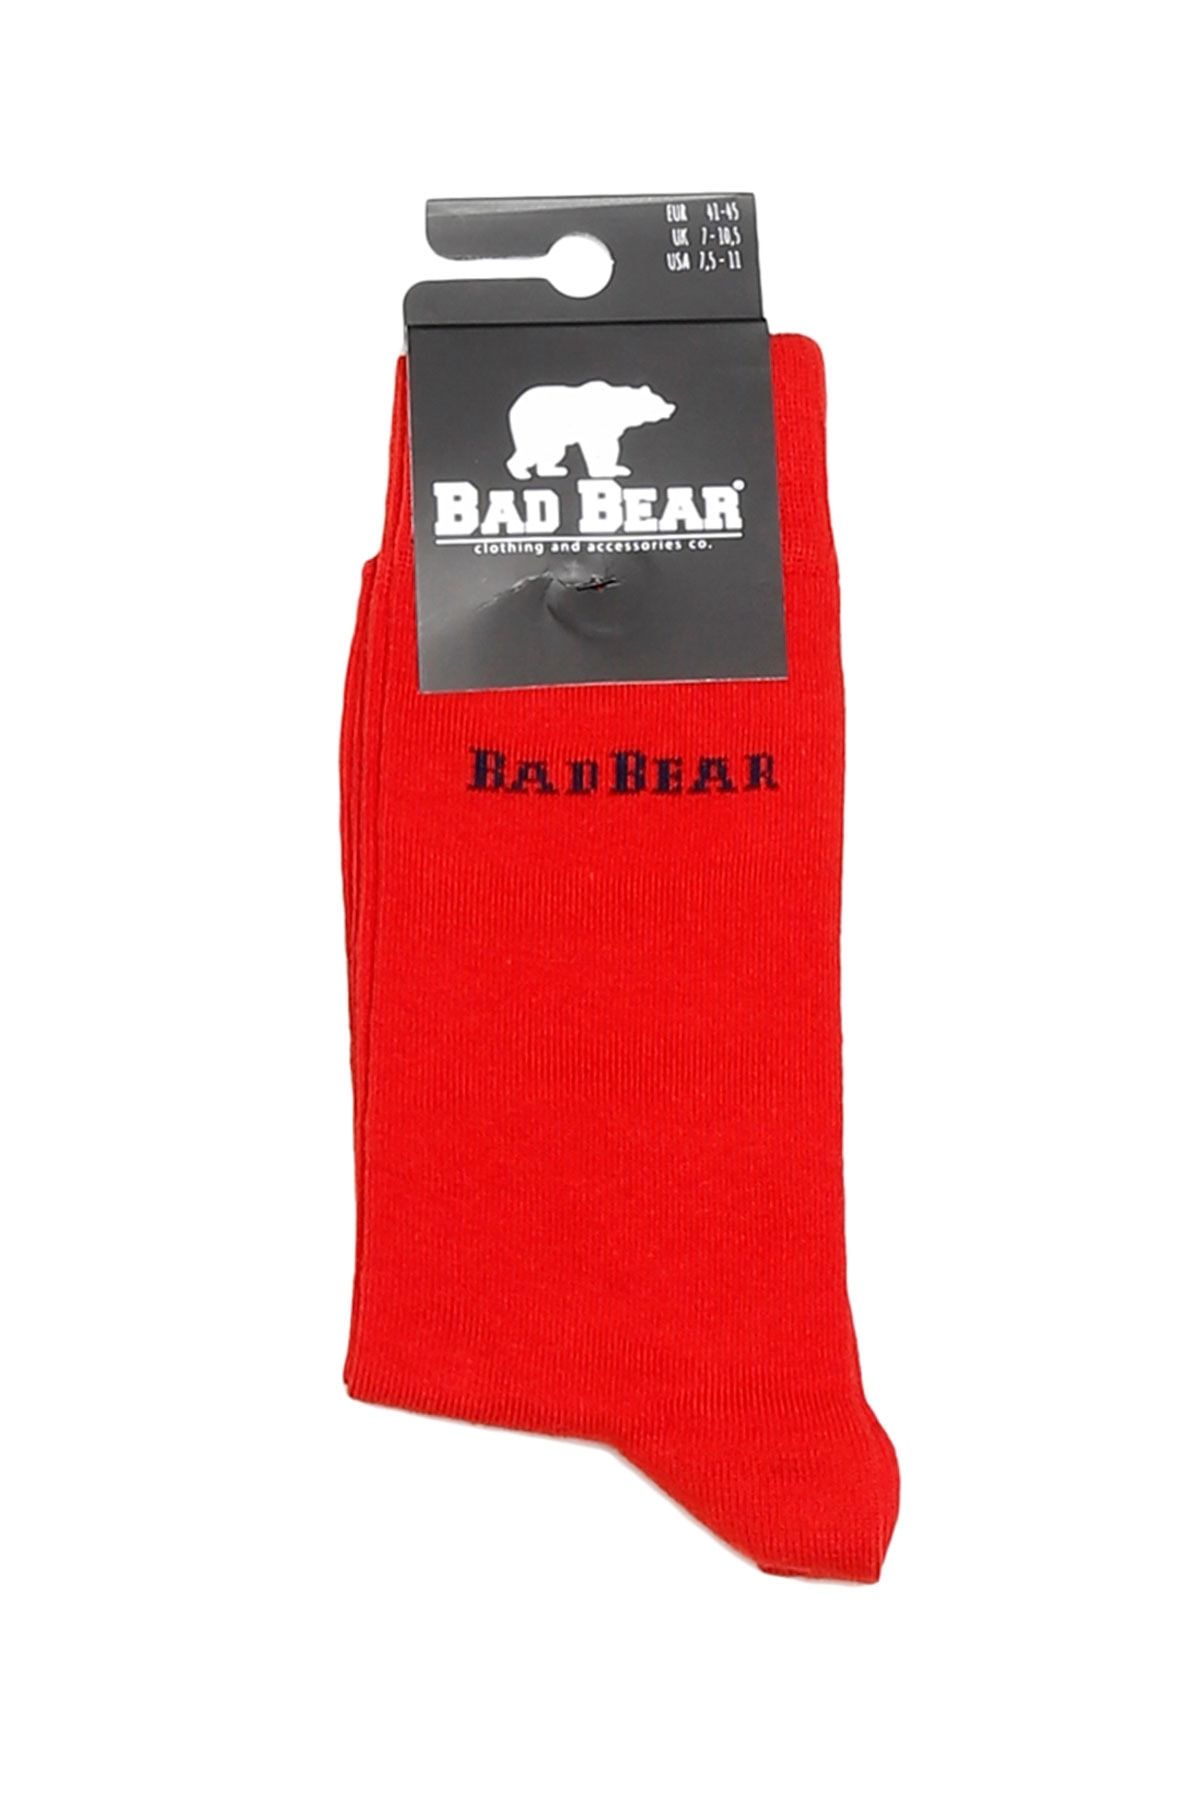 Bad Bear SOLID TALL RED